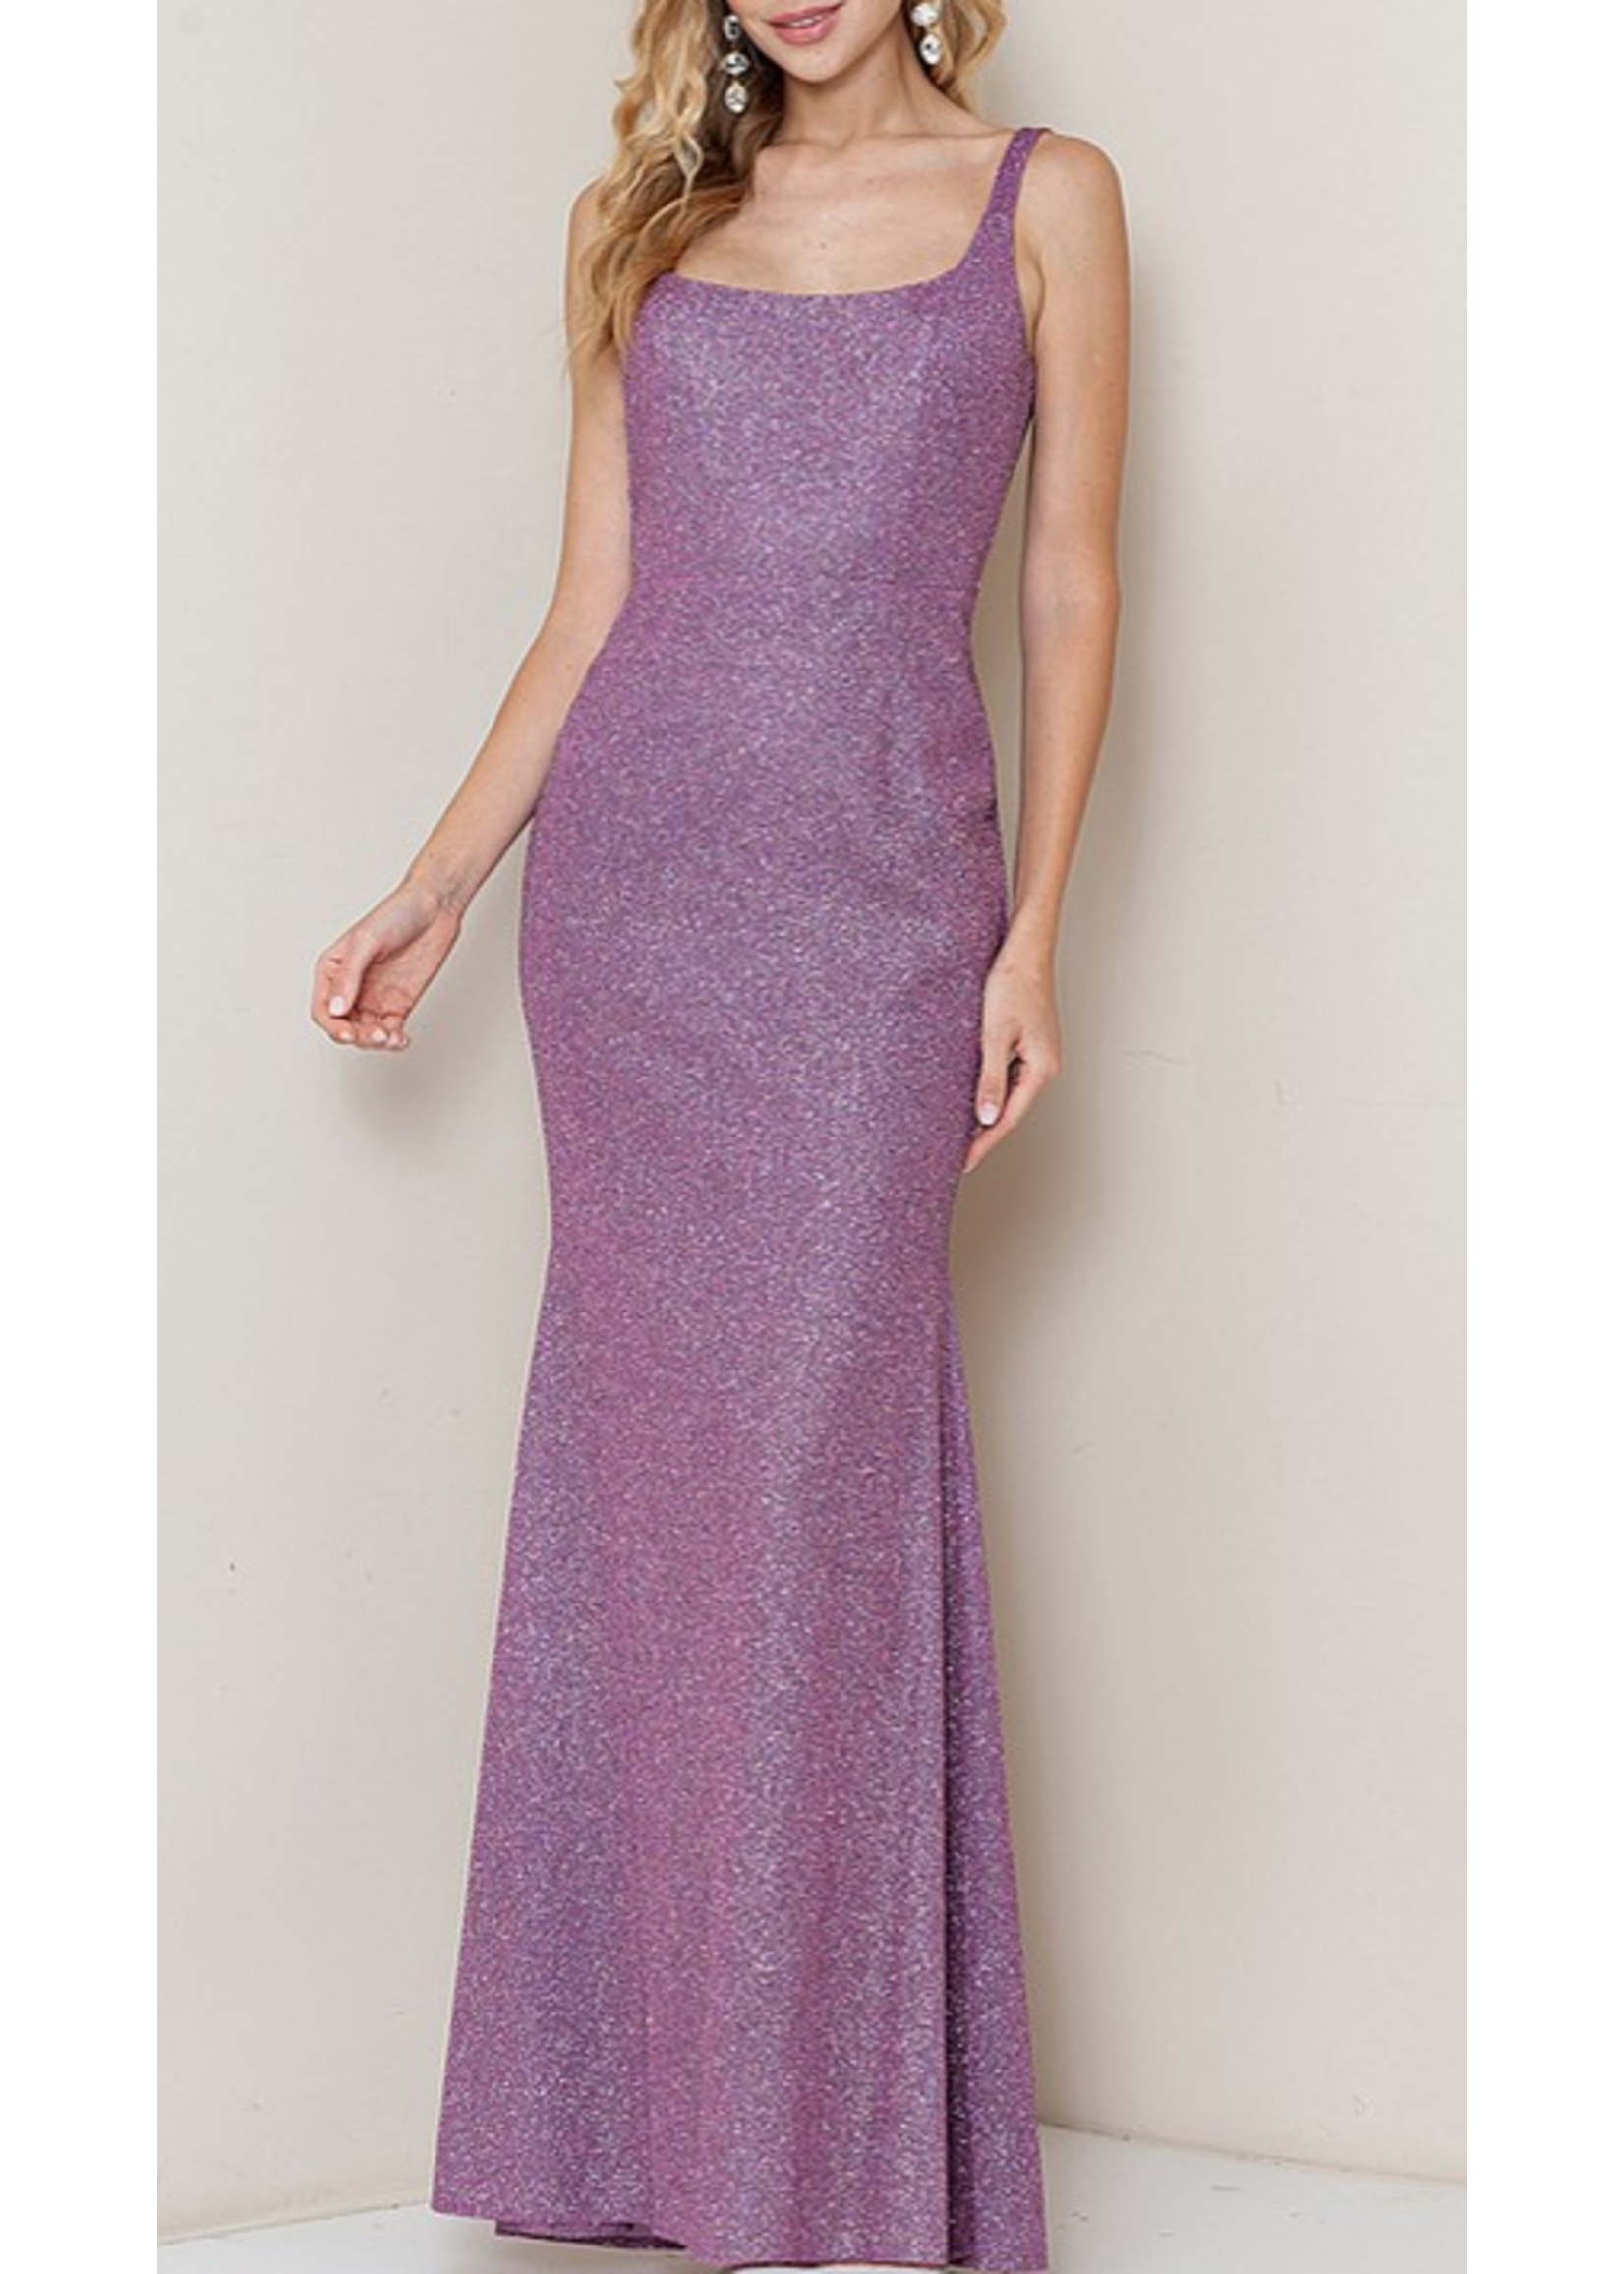 MANMF22141 - SQUARE NECK SLEEVELSS SPARKLE EVENING GOWN